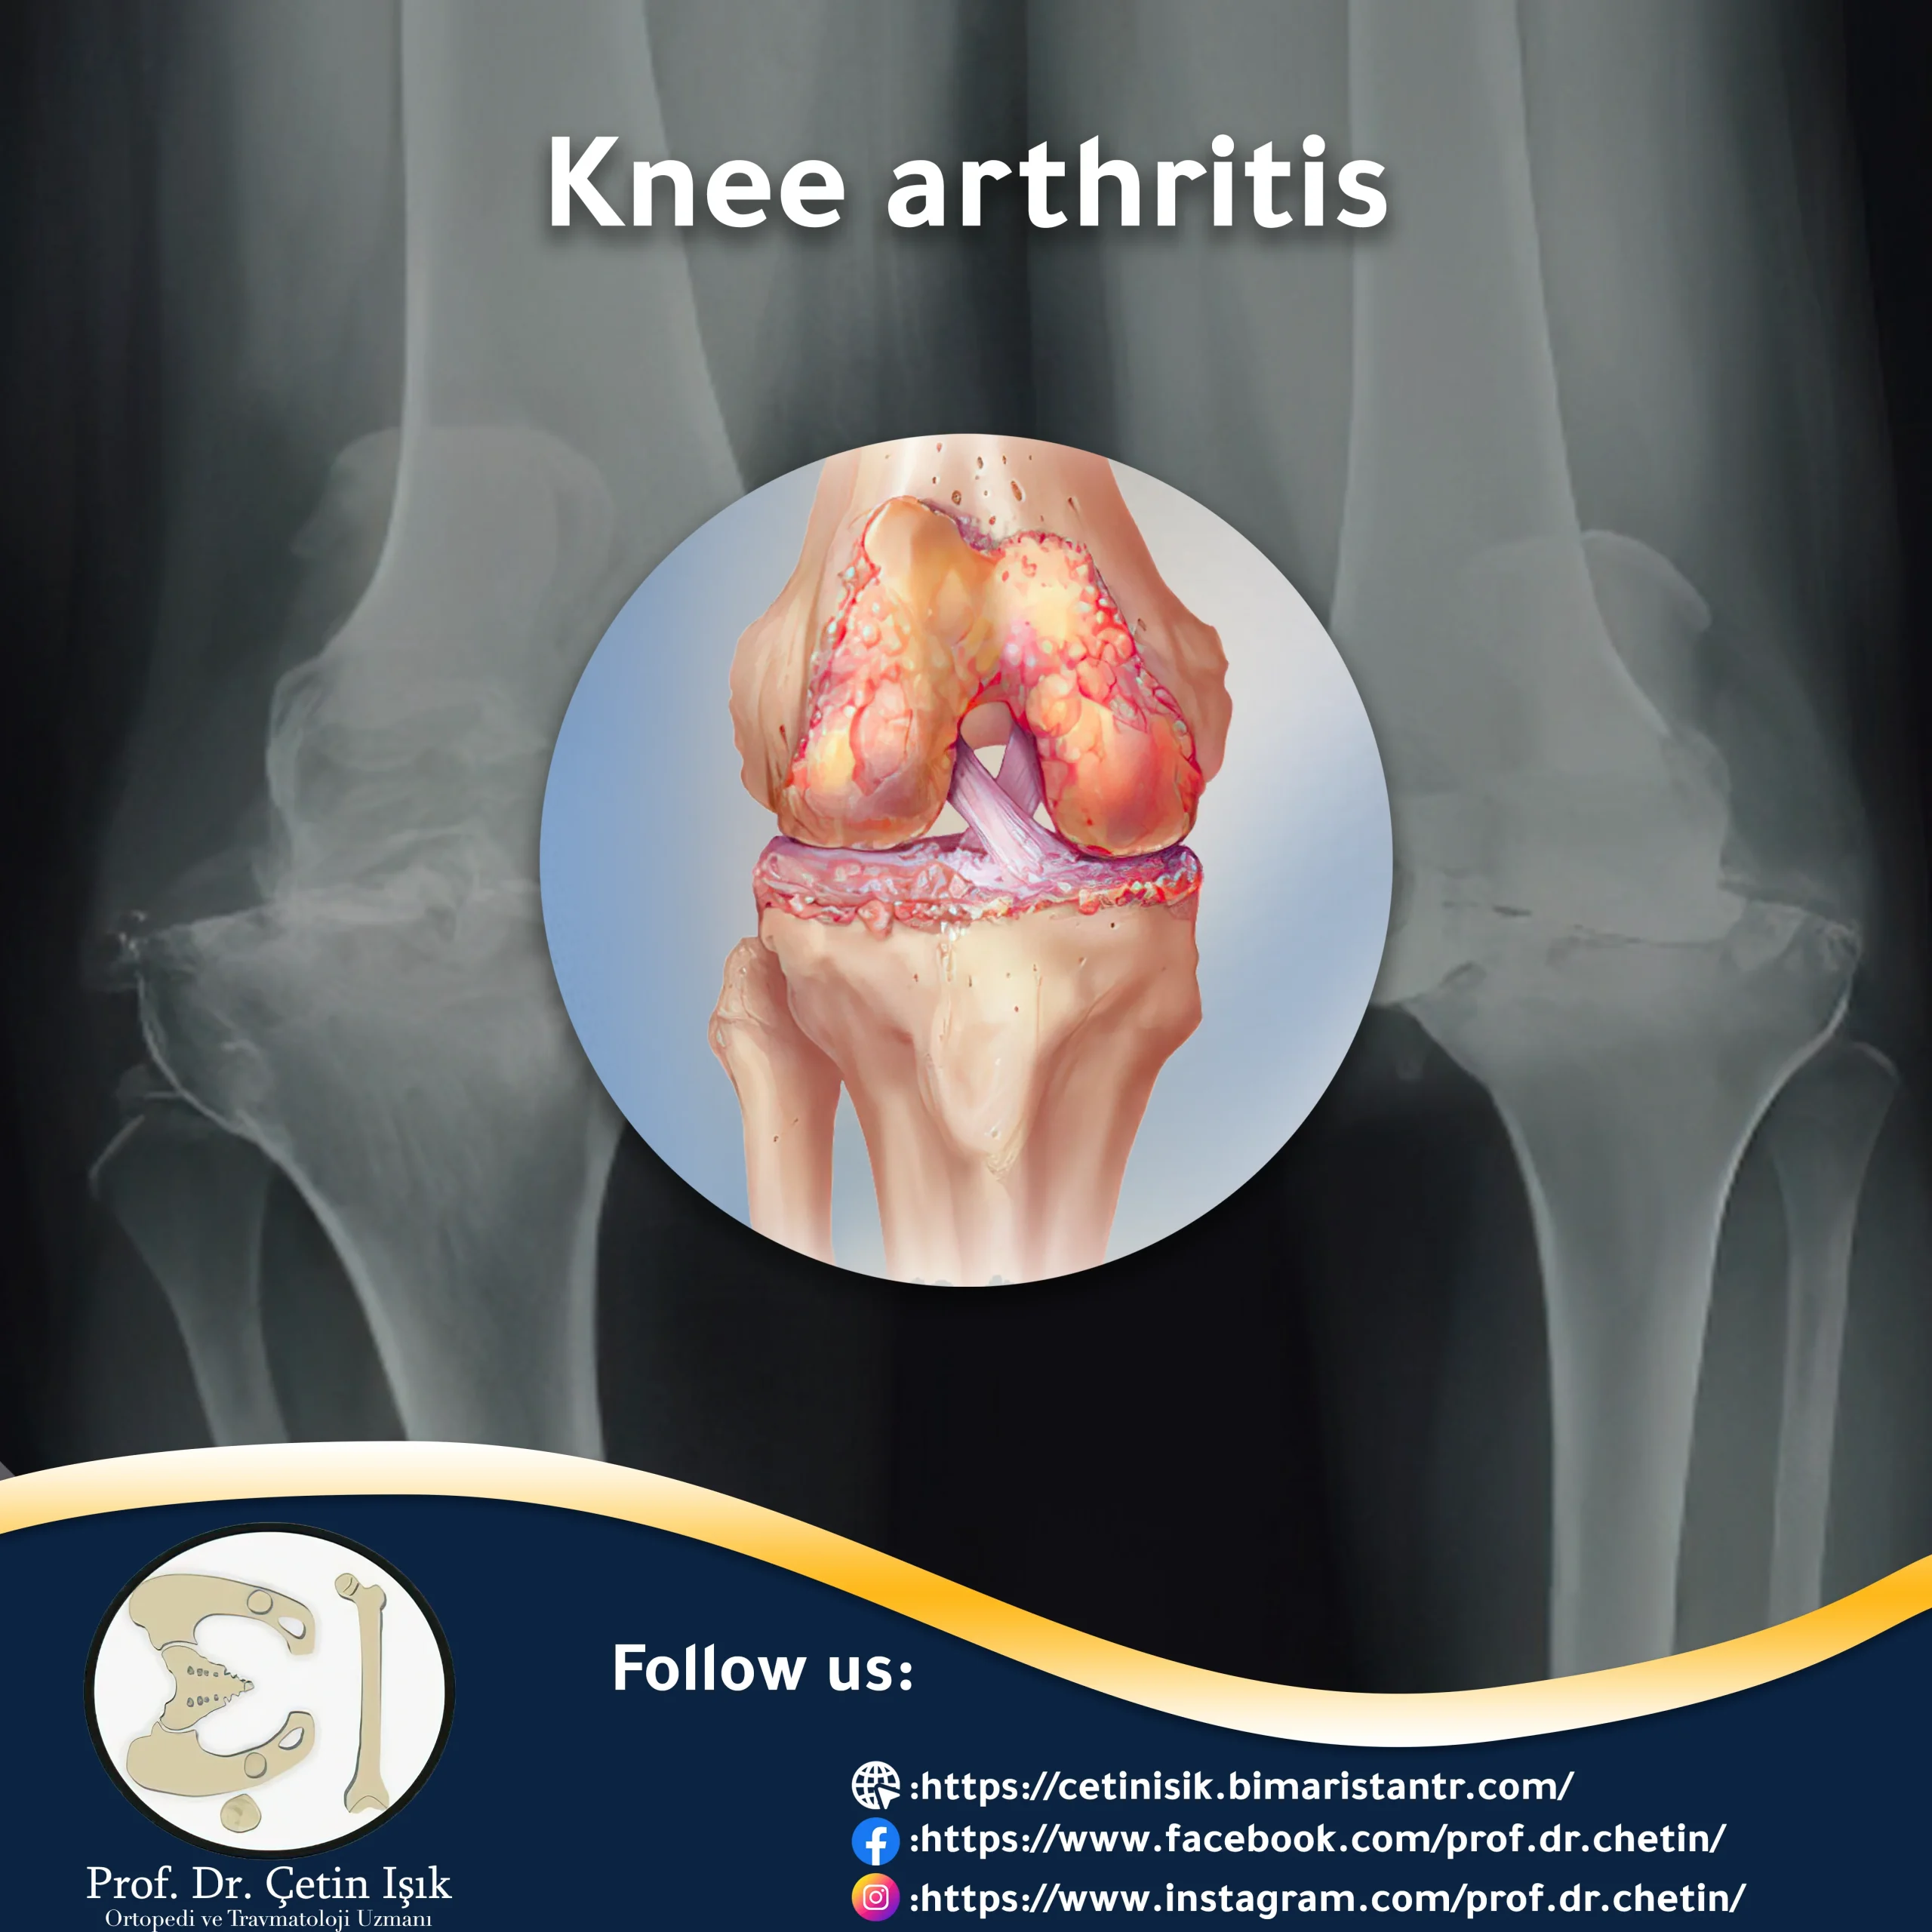 Knee arthritis and the most prominent methods of treatment